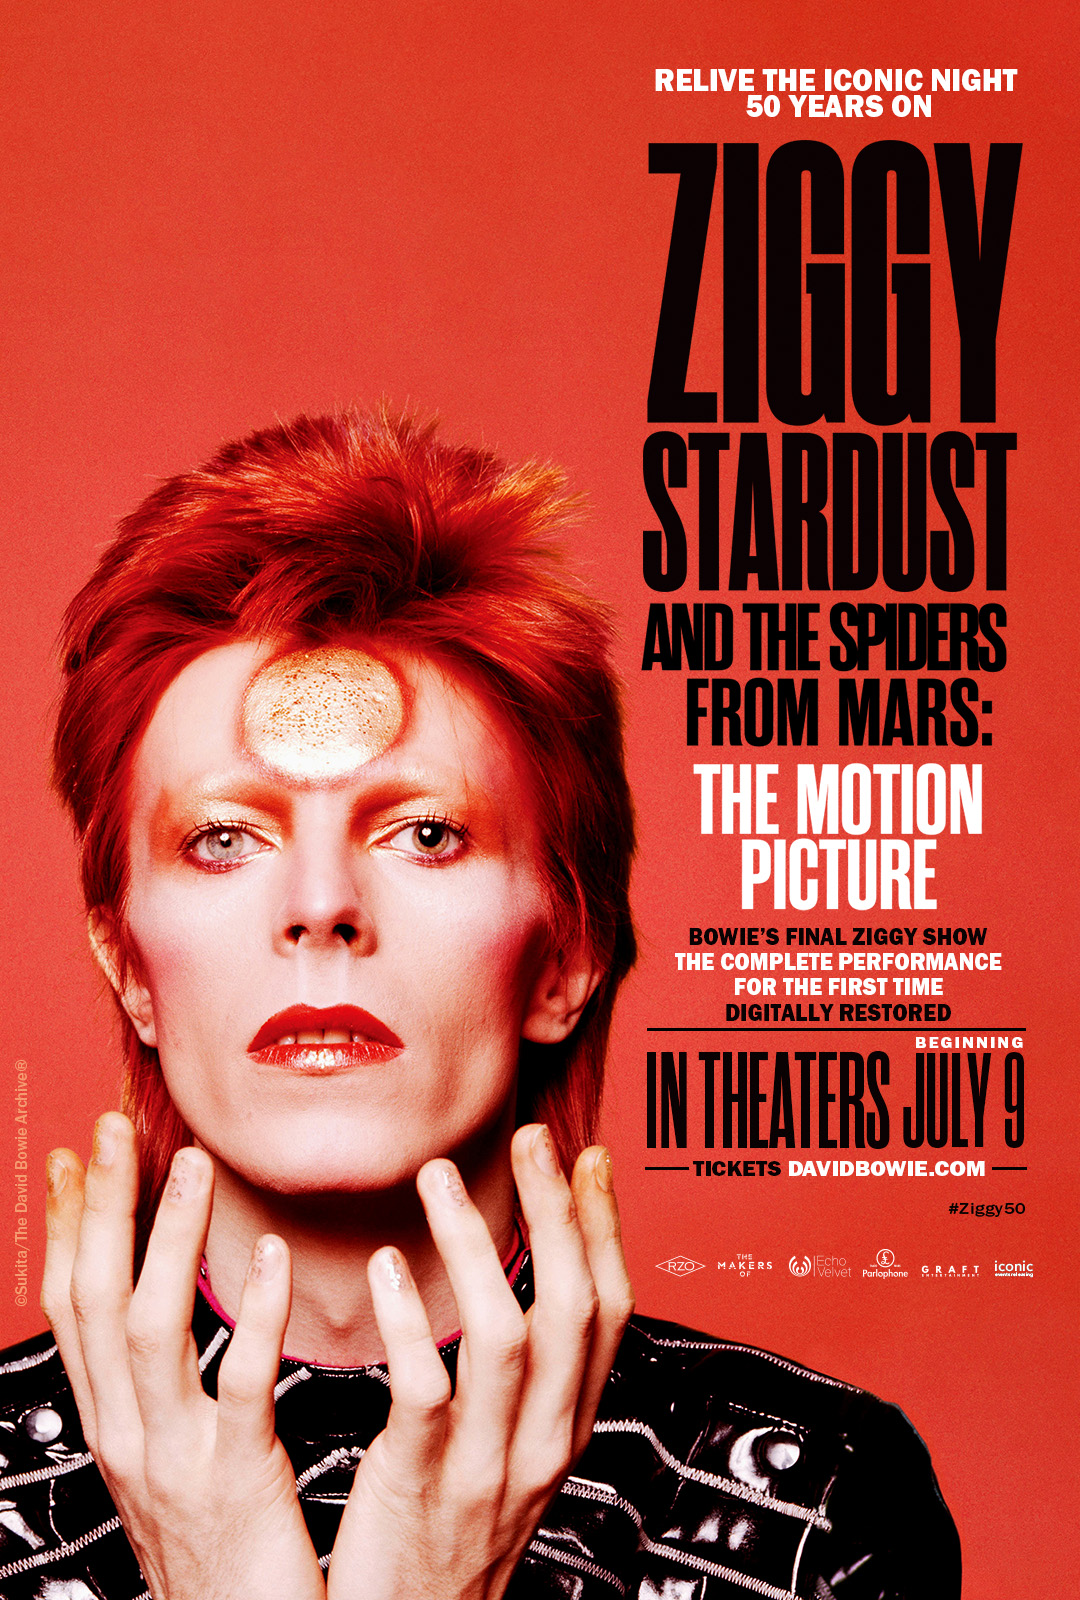 David Bowie - Ziggy Stardust And The Spiders From Mars (The Motion Picture  Soundtrack) (2LP)